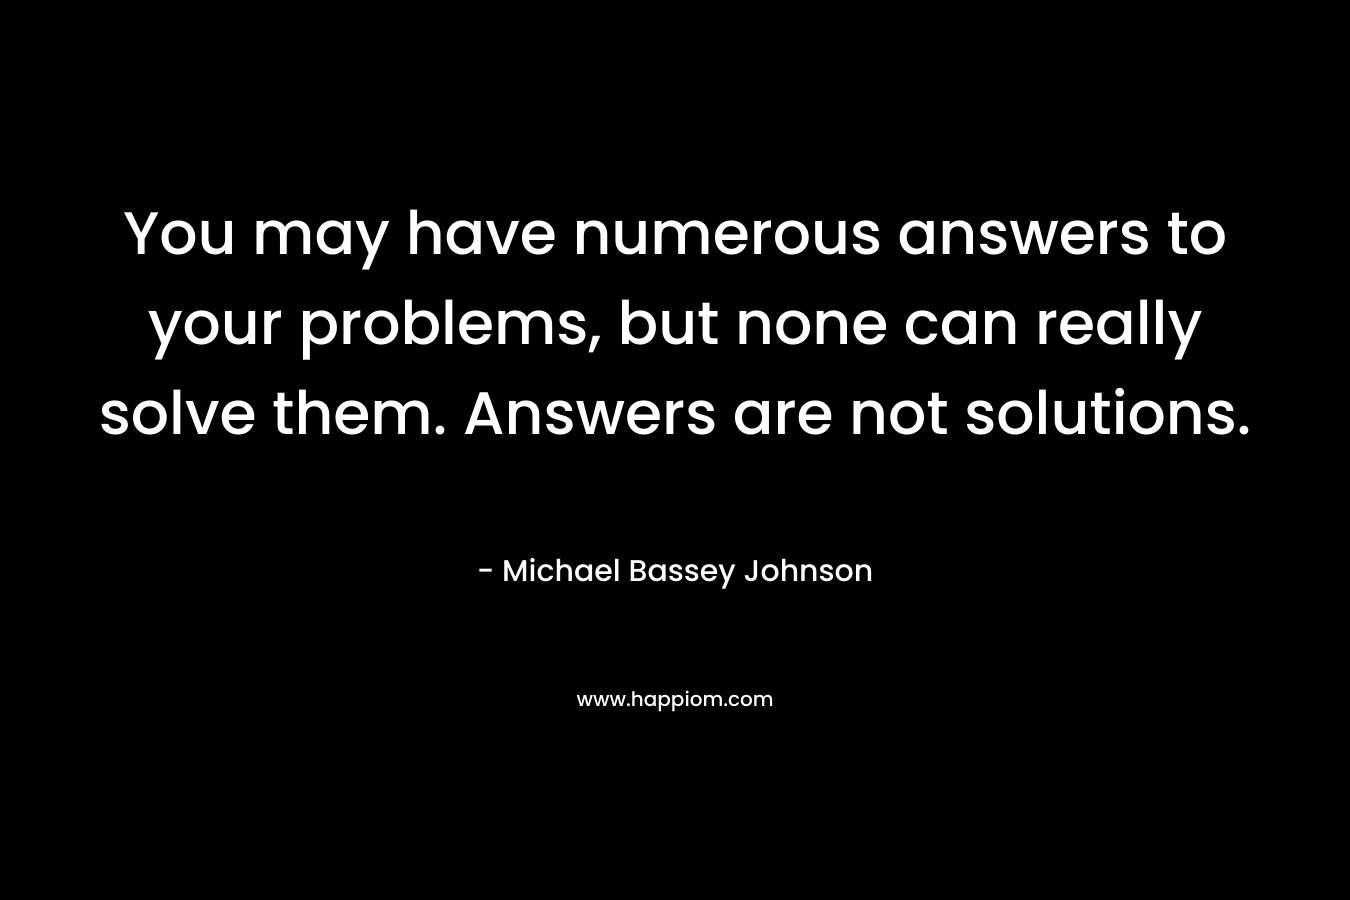 You may have numerous answers to your problems, but none can really solve them. Answers are not solutions. – Michael Bassey Johnson